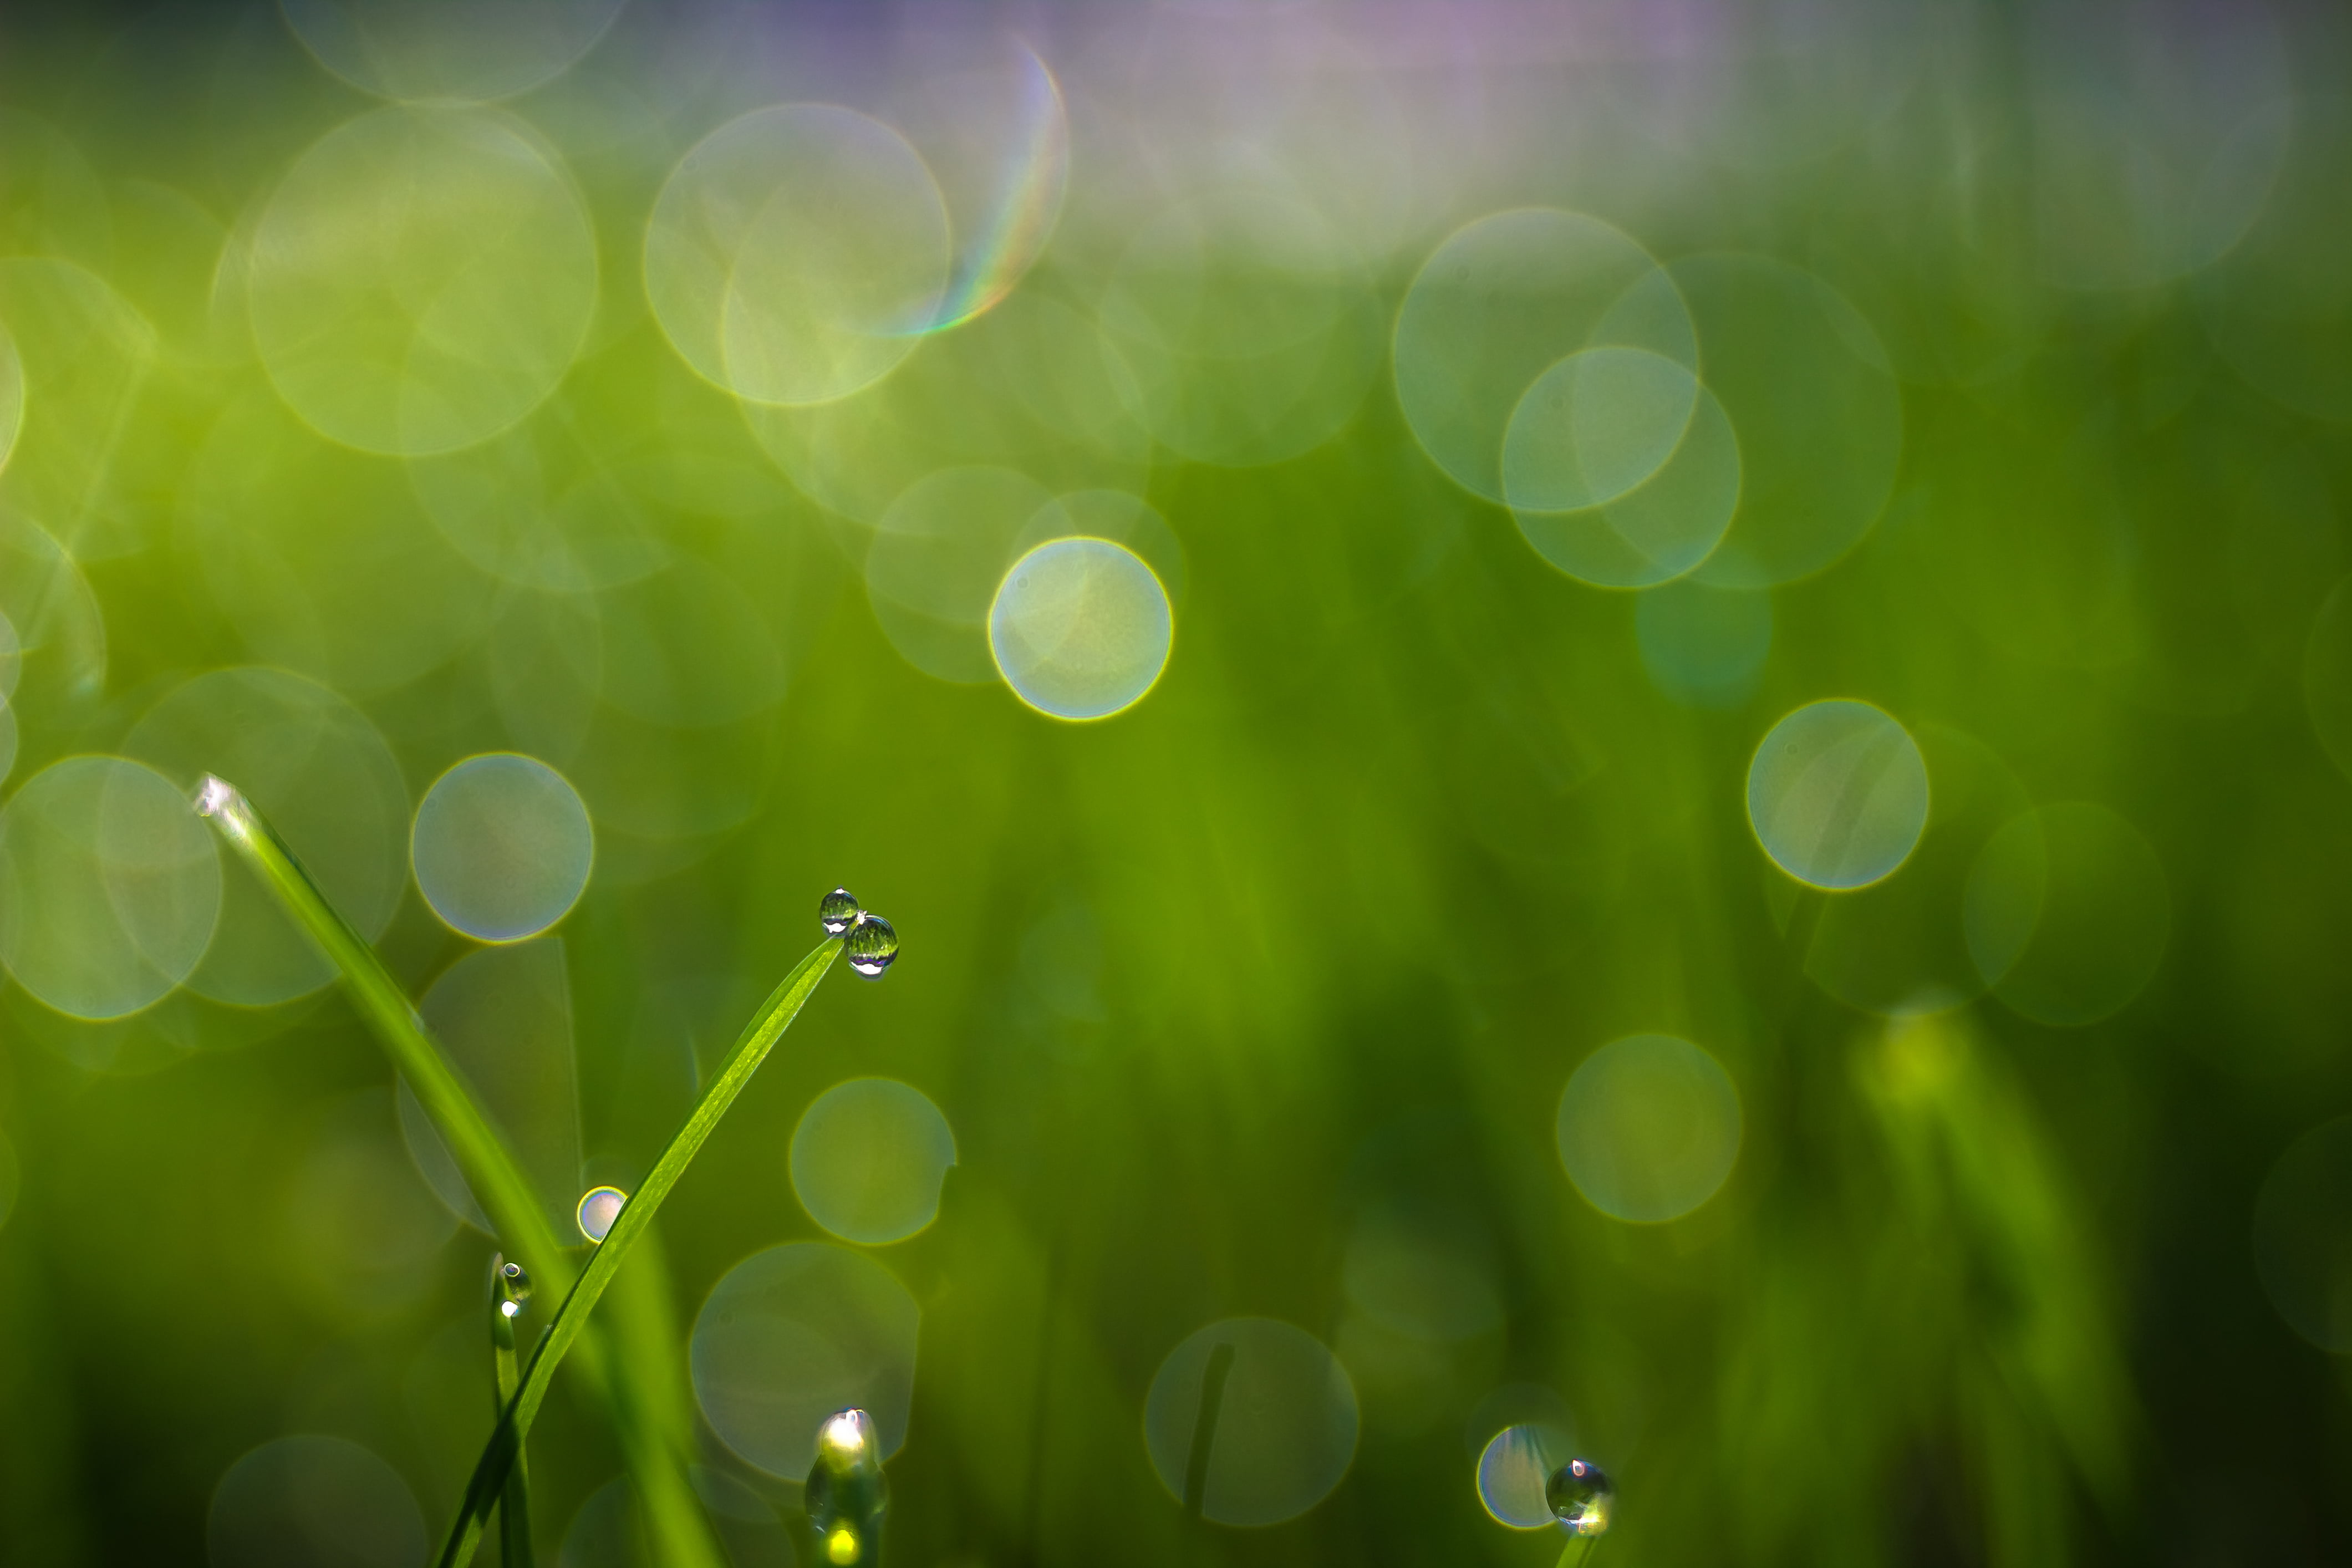 time laps photo of green leaves, Do, Dew, bokeh, roua, Carl  Zeiss